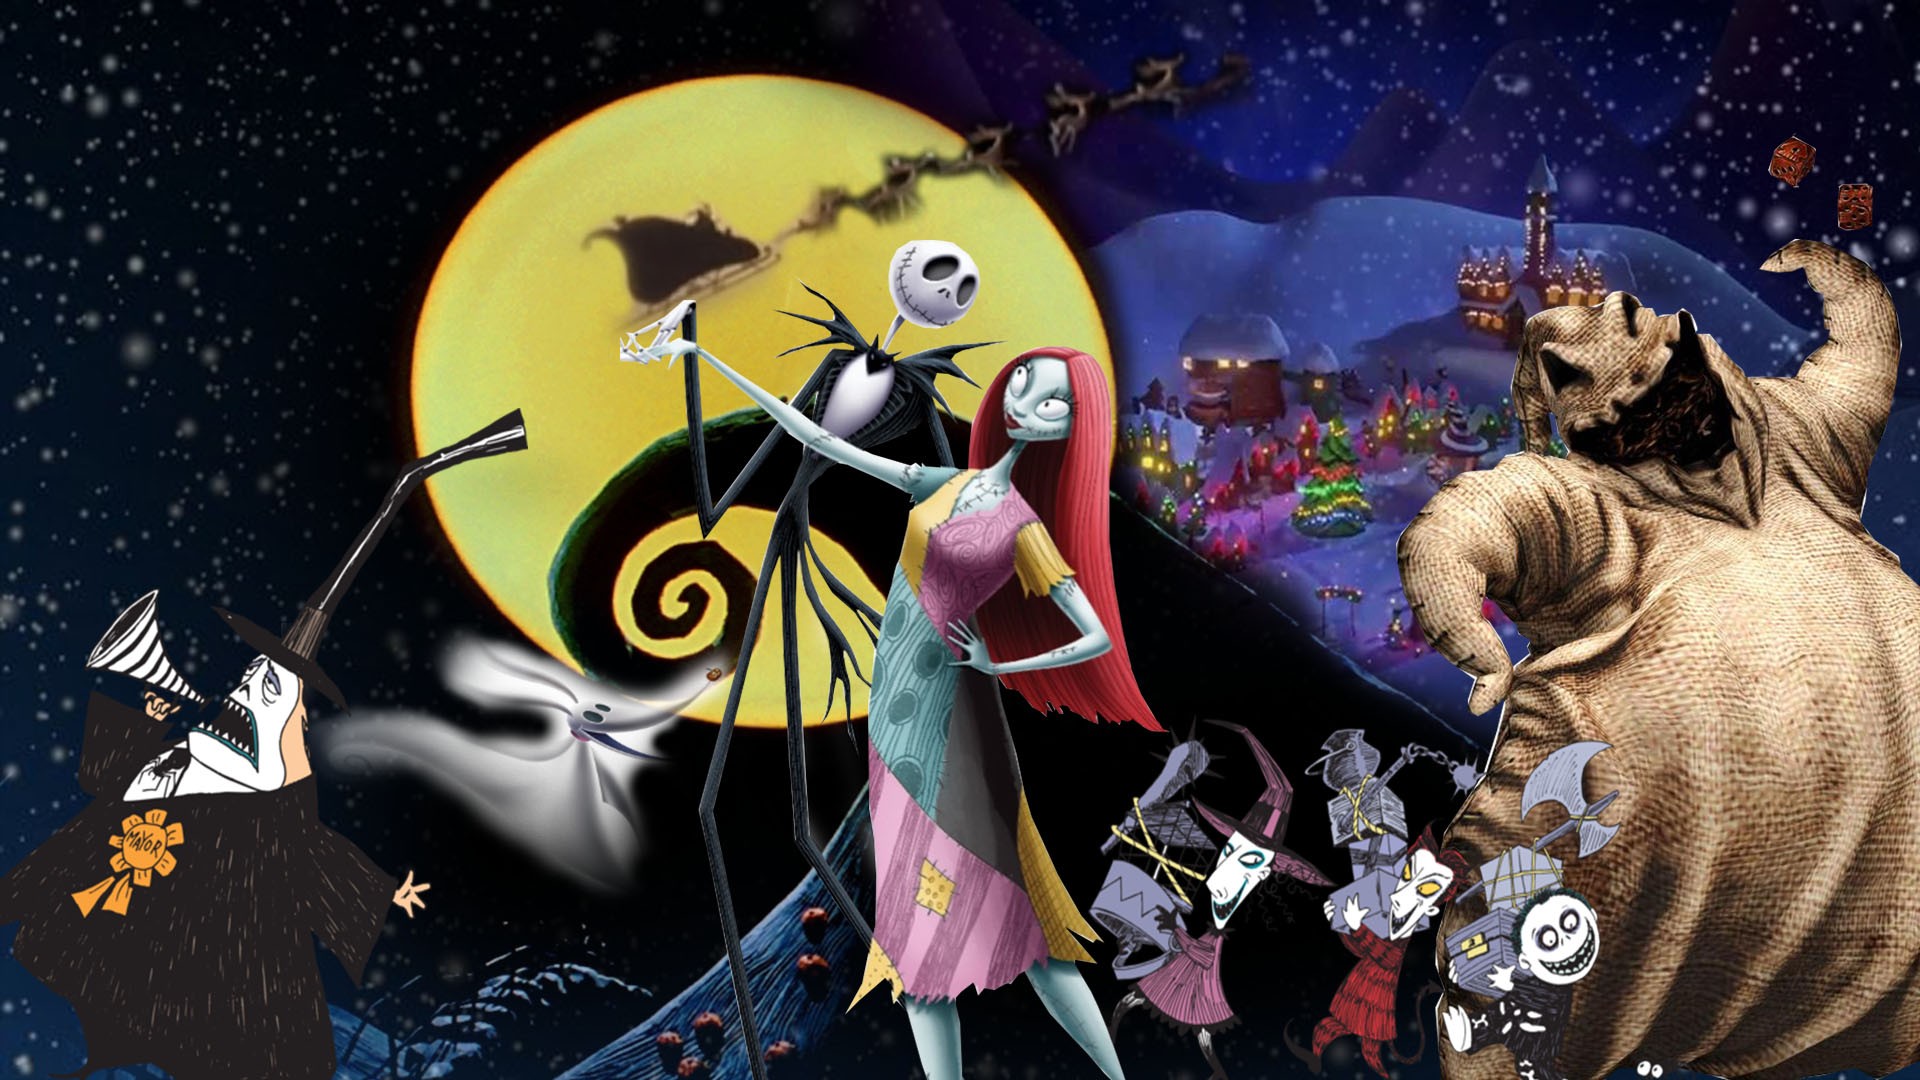 The Nightmare Before Christmas Wallpaper - 2022 Movie Poster Wallpaper HD.